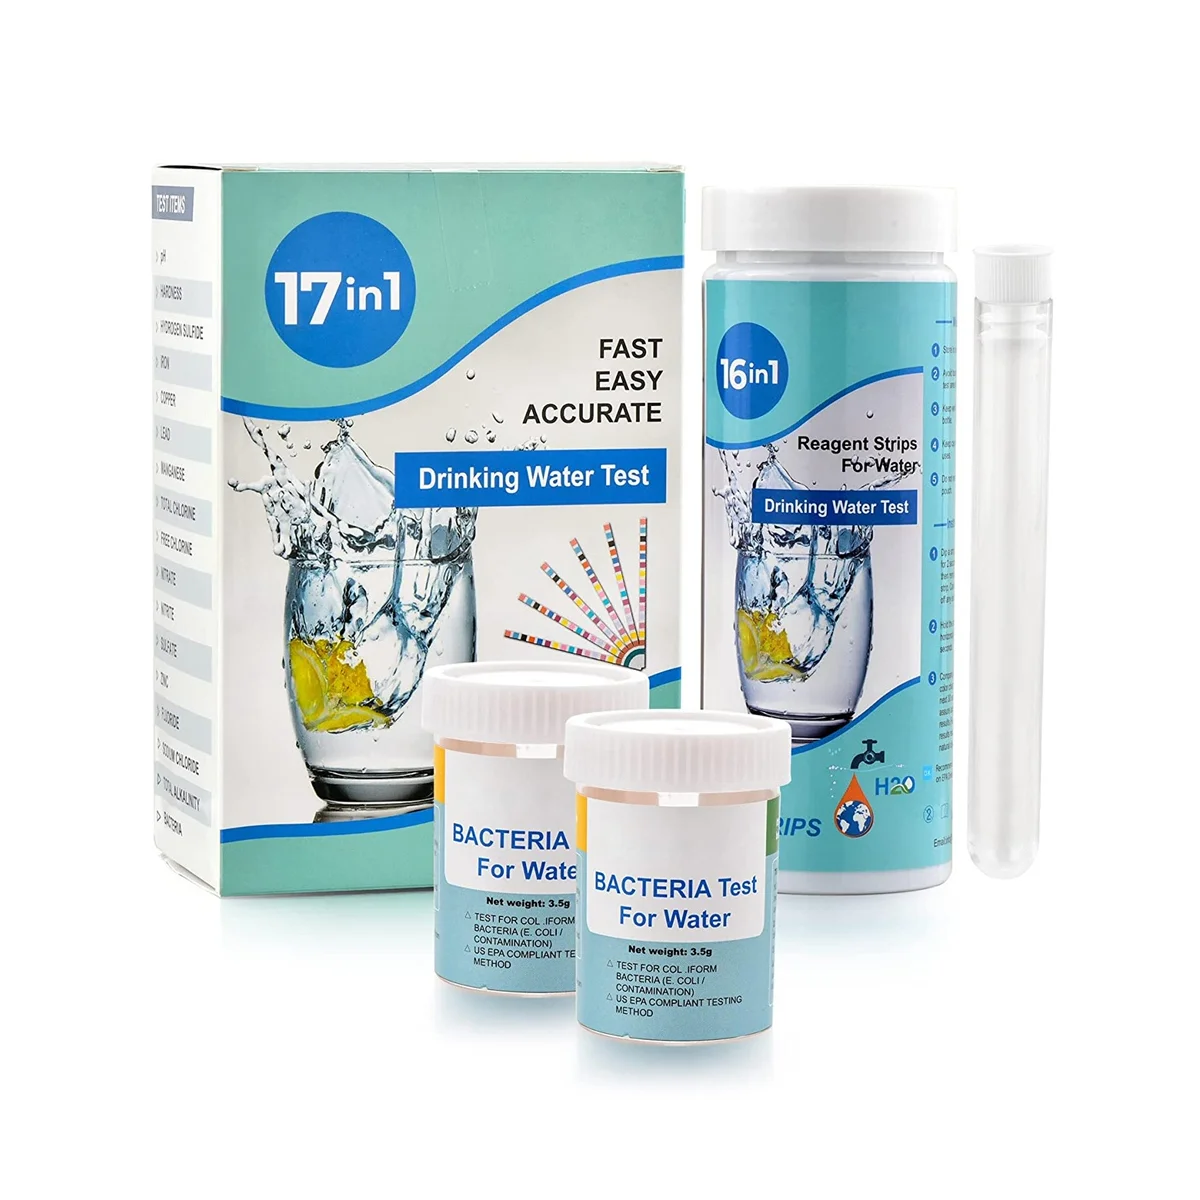 

17-in-1 Complete Water Test Kit for Home,100 Strips + 2 Water Testing Kits for Drinking Water Easy Testing, PH, Lead